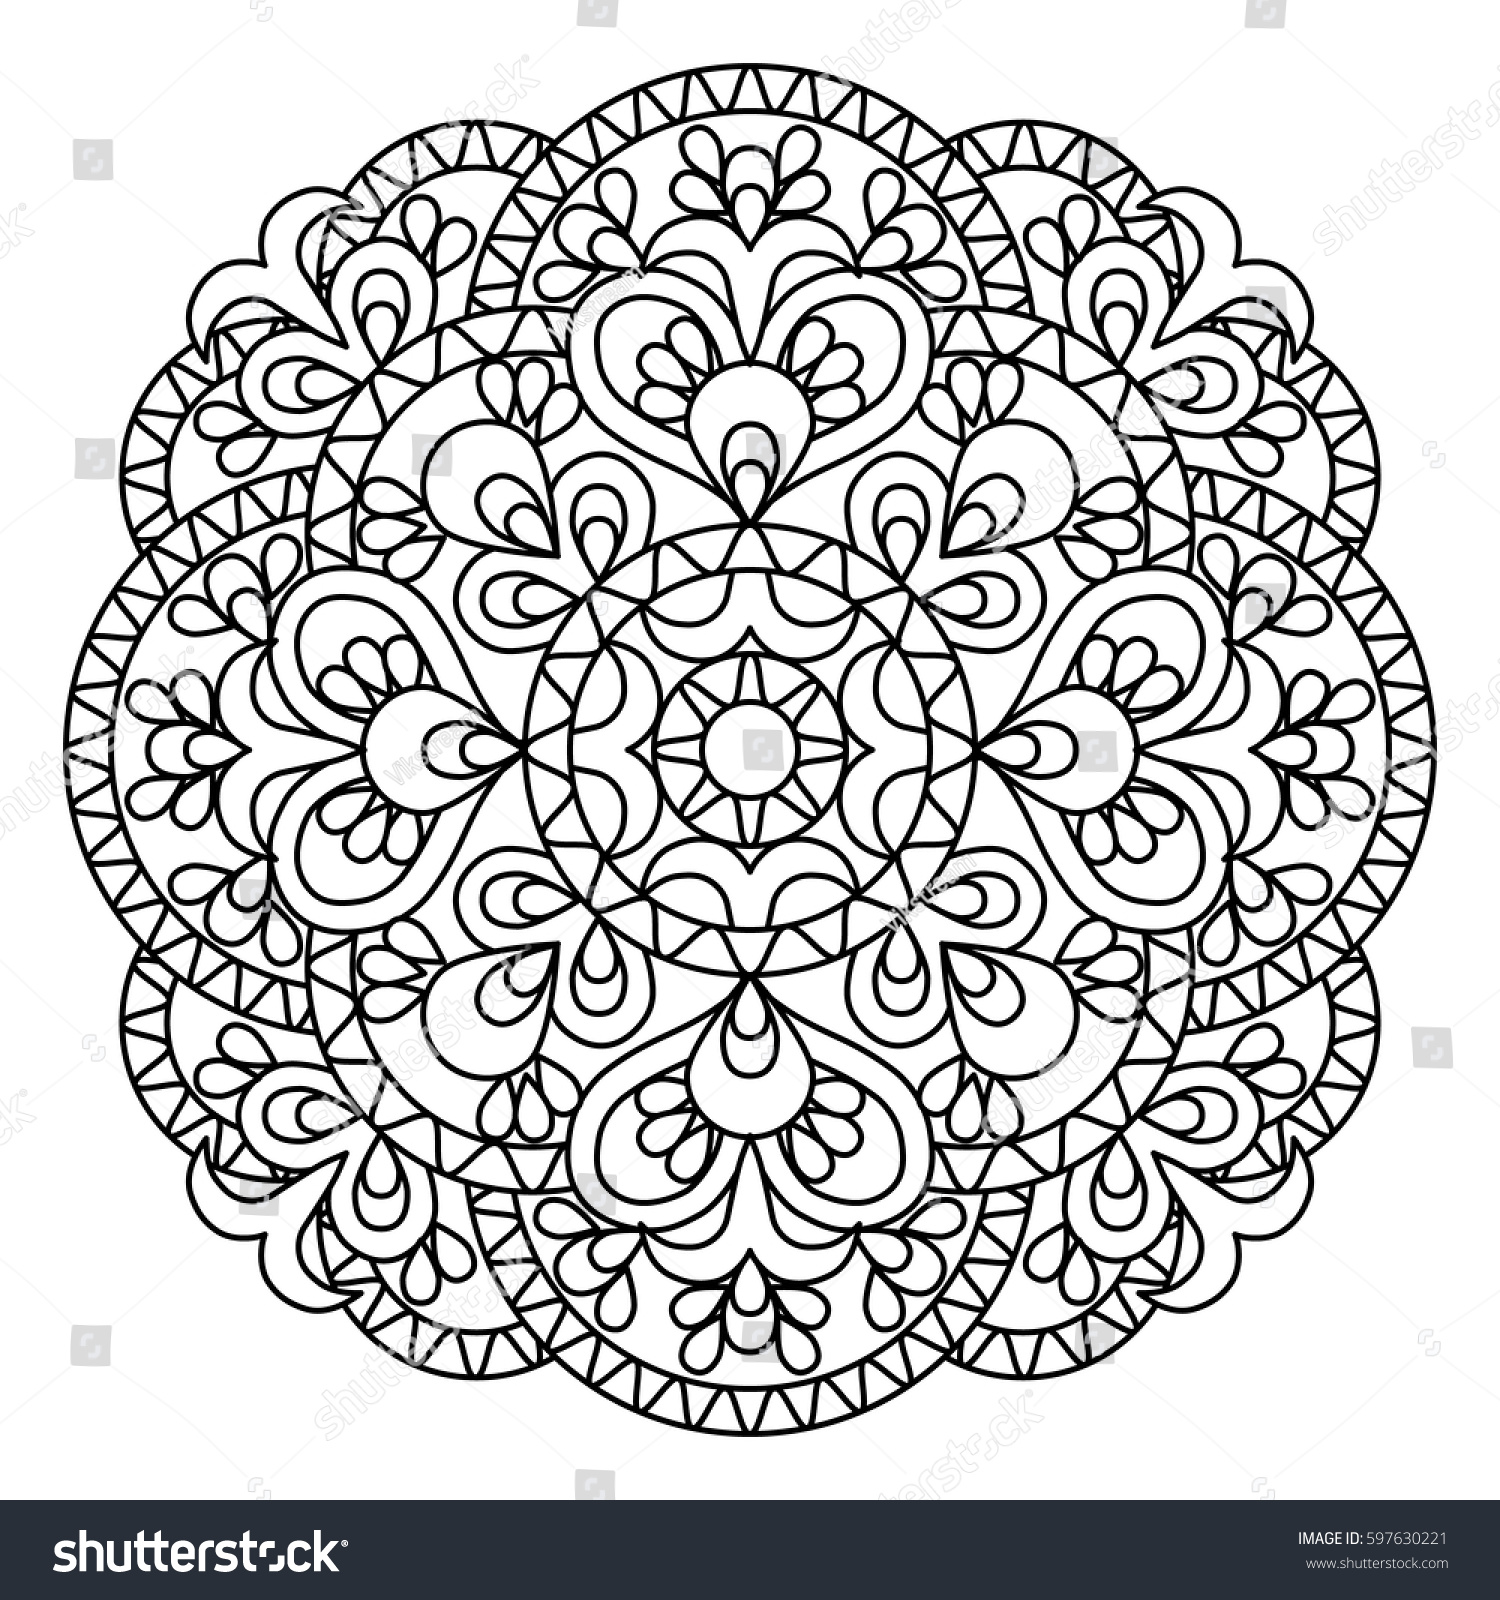 Round Ornament Pattern Stock Vector (Royalty Free) 597630221 | Shutterstock